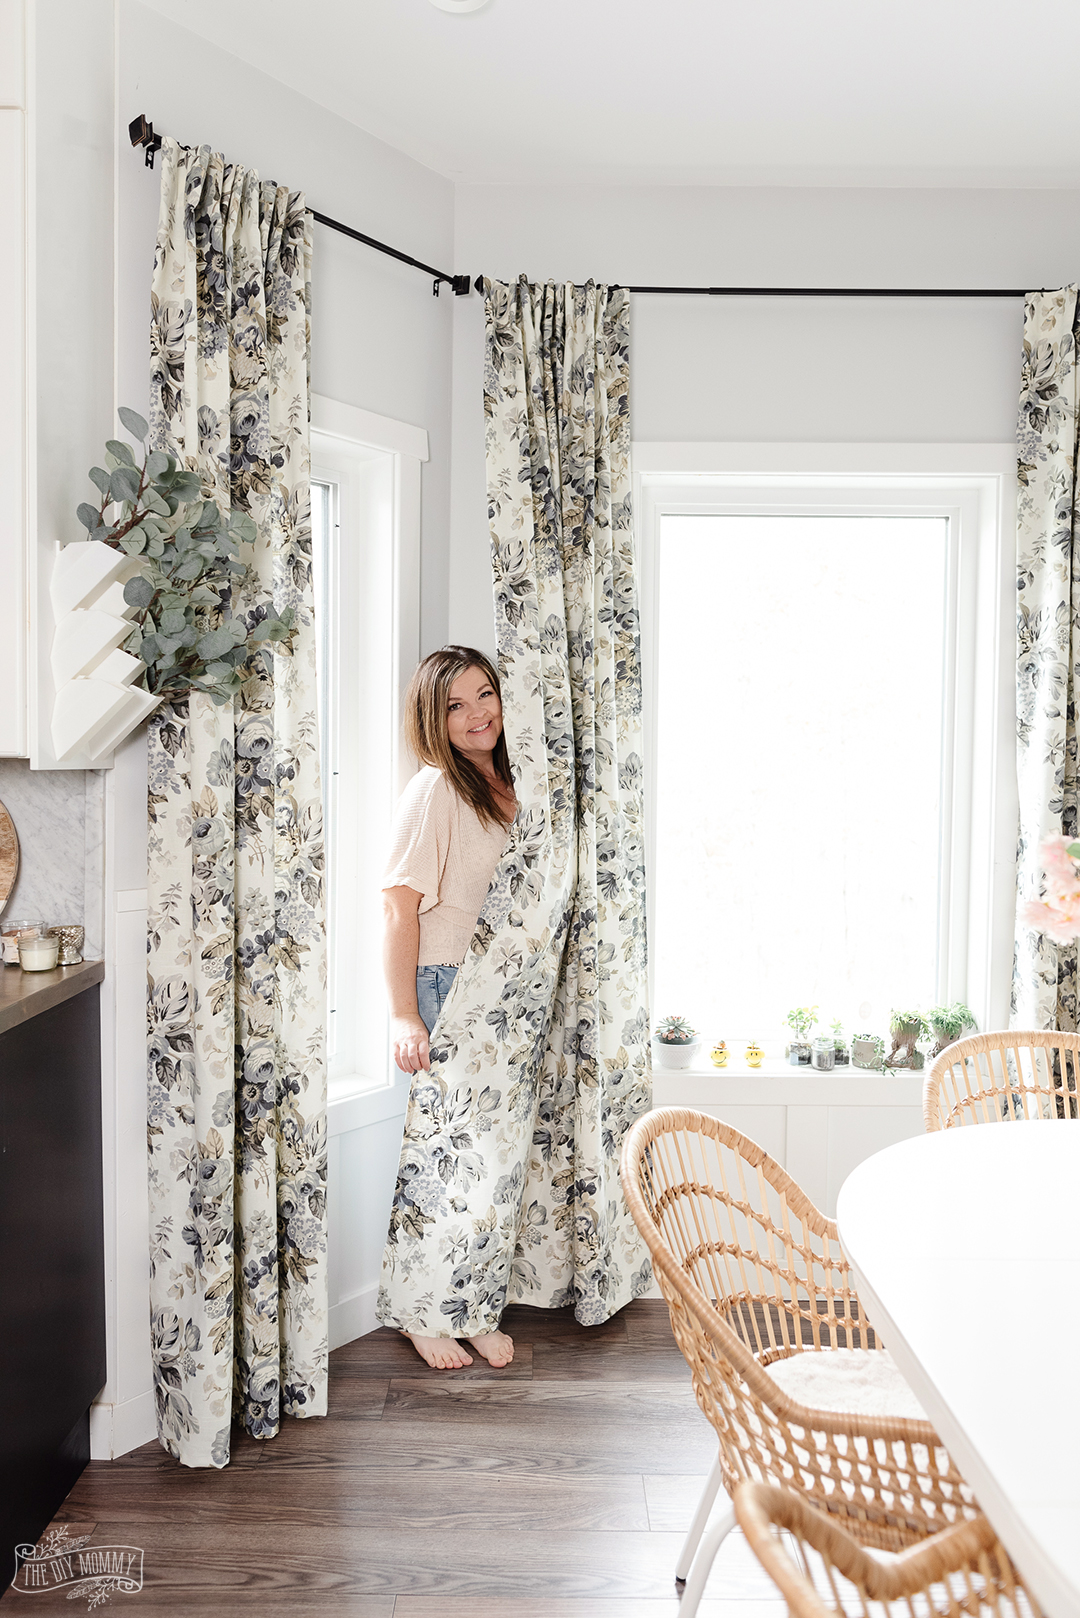 Learn how to sew drapes with pleater tape with this simple DIY curtain tutorial